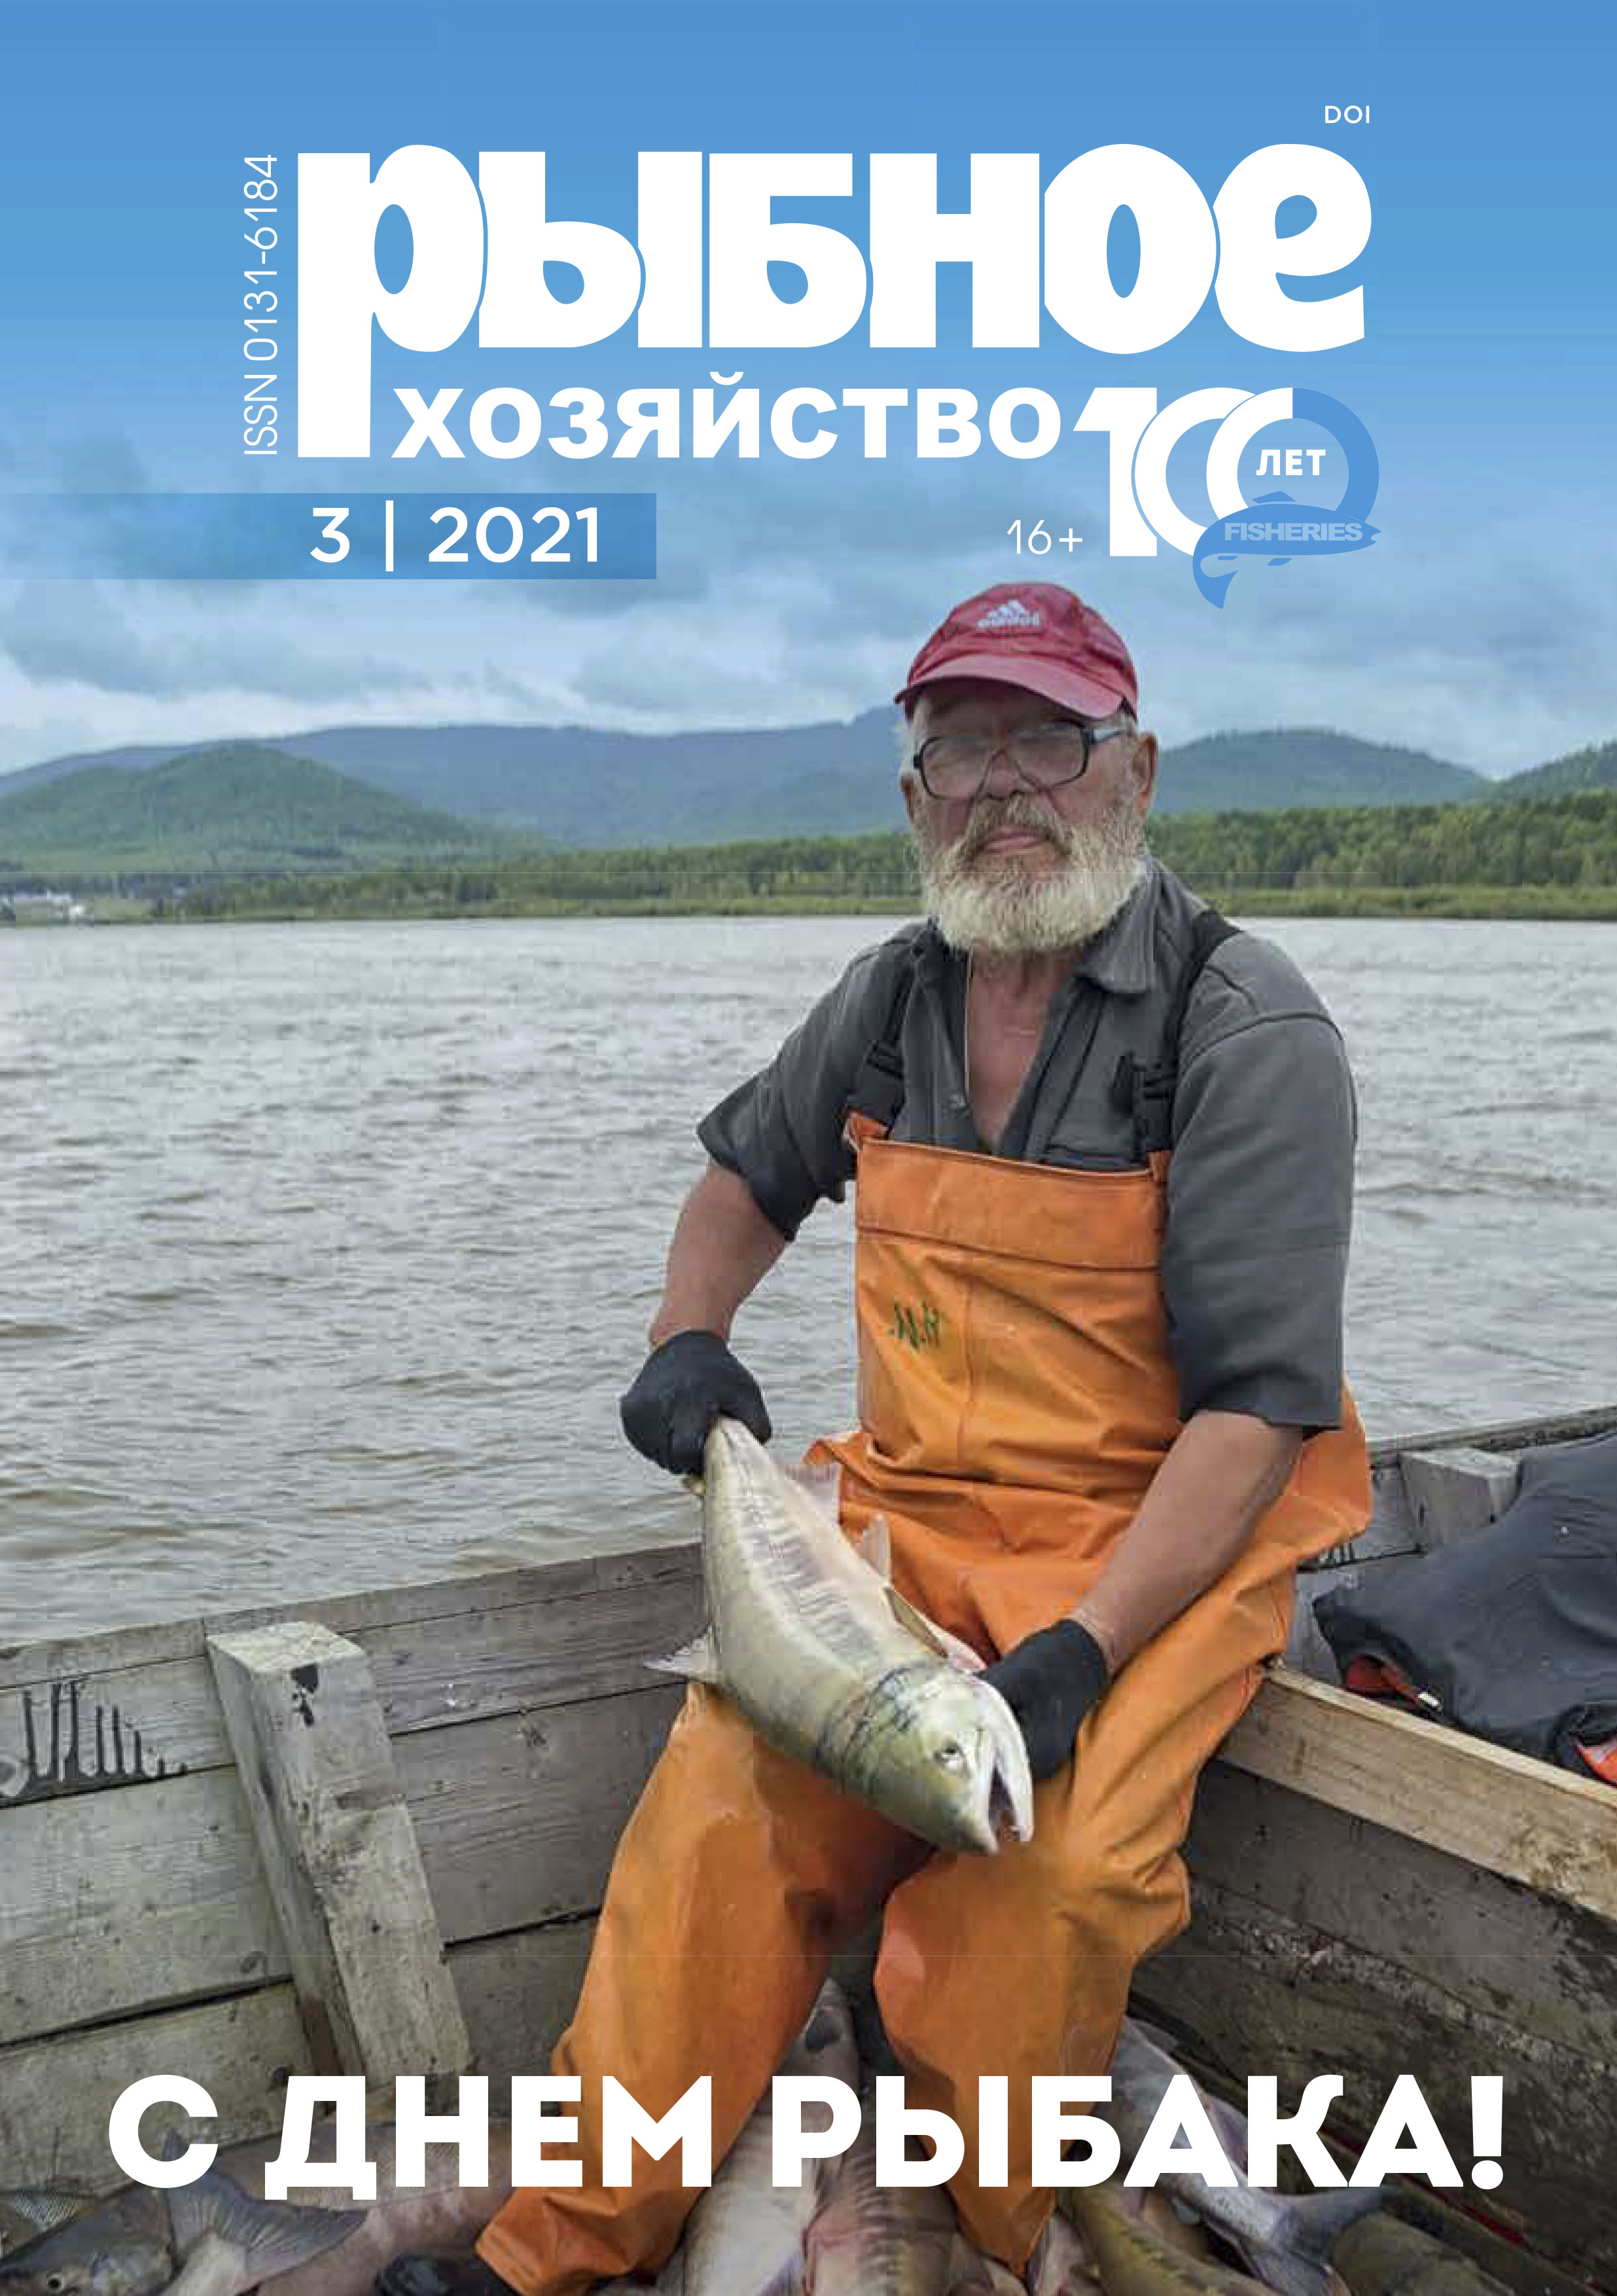                         EVALUATION OF LINEAR GROWTH INDICATORS OF RIVER PERCH (PERCA FLUVIATILIS L.) IN THE KUIBYSHEV RESERVOIR
            